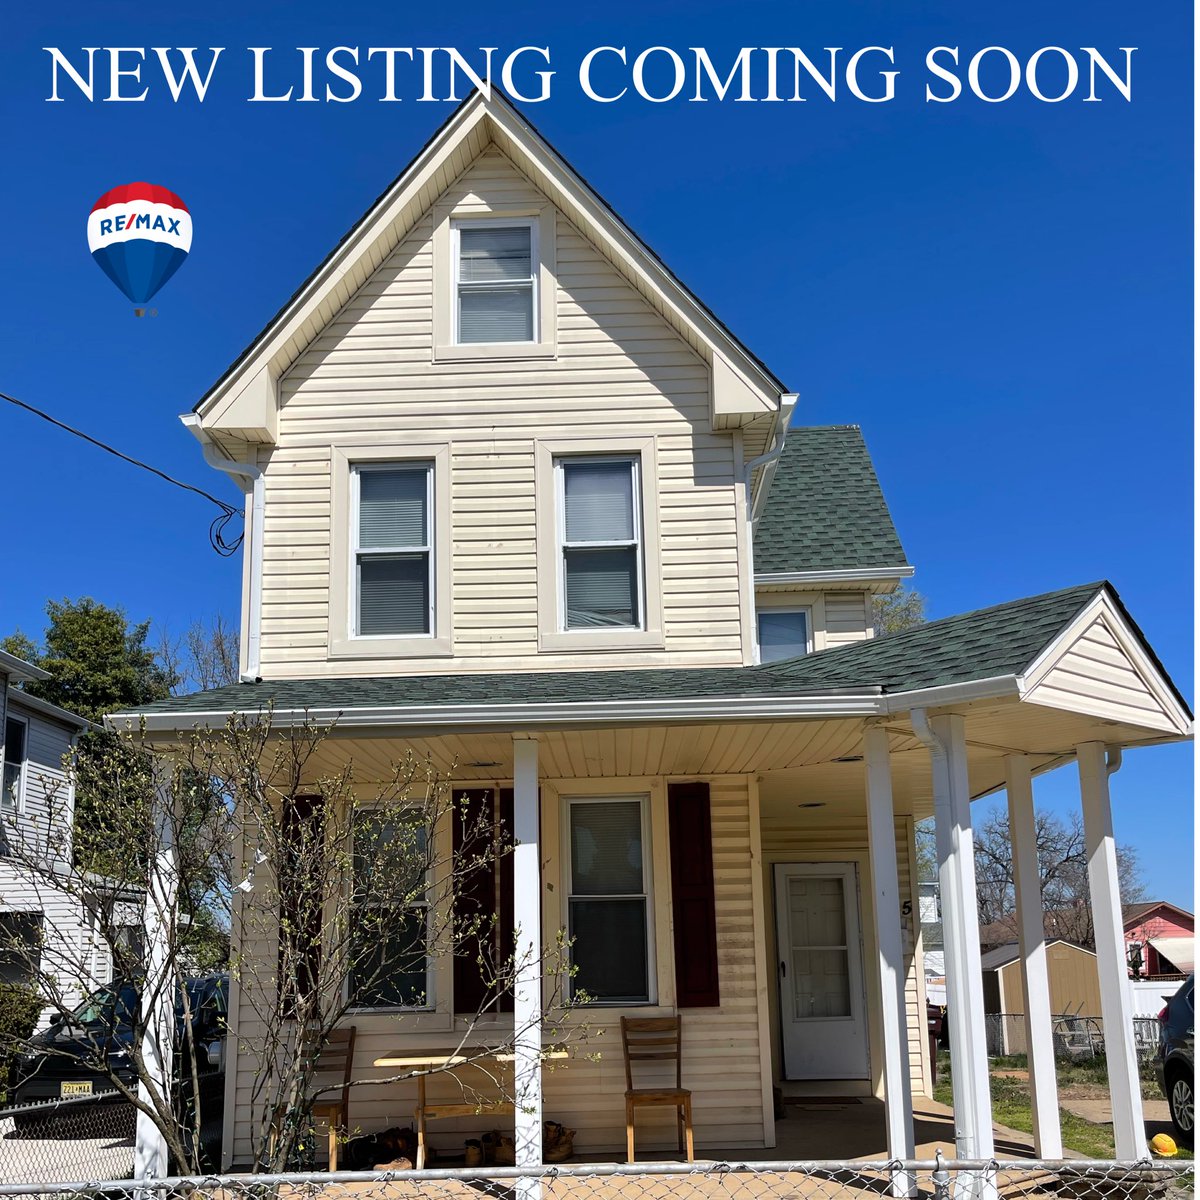 Coming Soon in Riverside… Contact me if you have any questions.   You will not be disappointed.. 🏡
#homeforsale #homeinvestors #GreatOpportunityAwaits #realtor